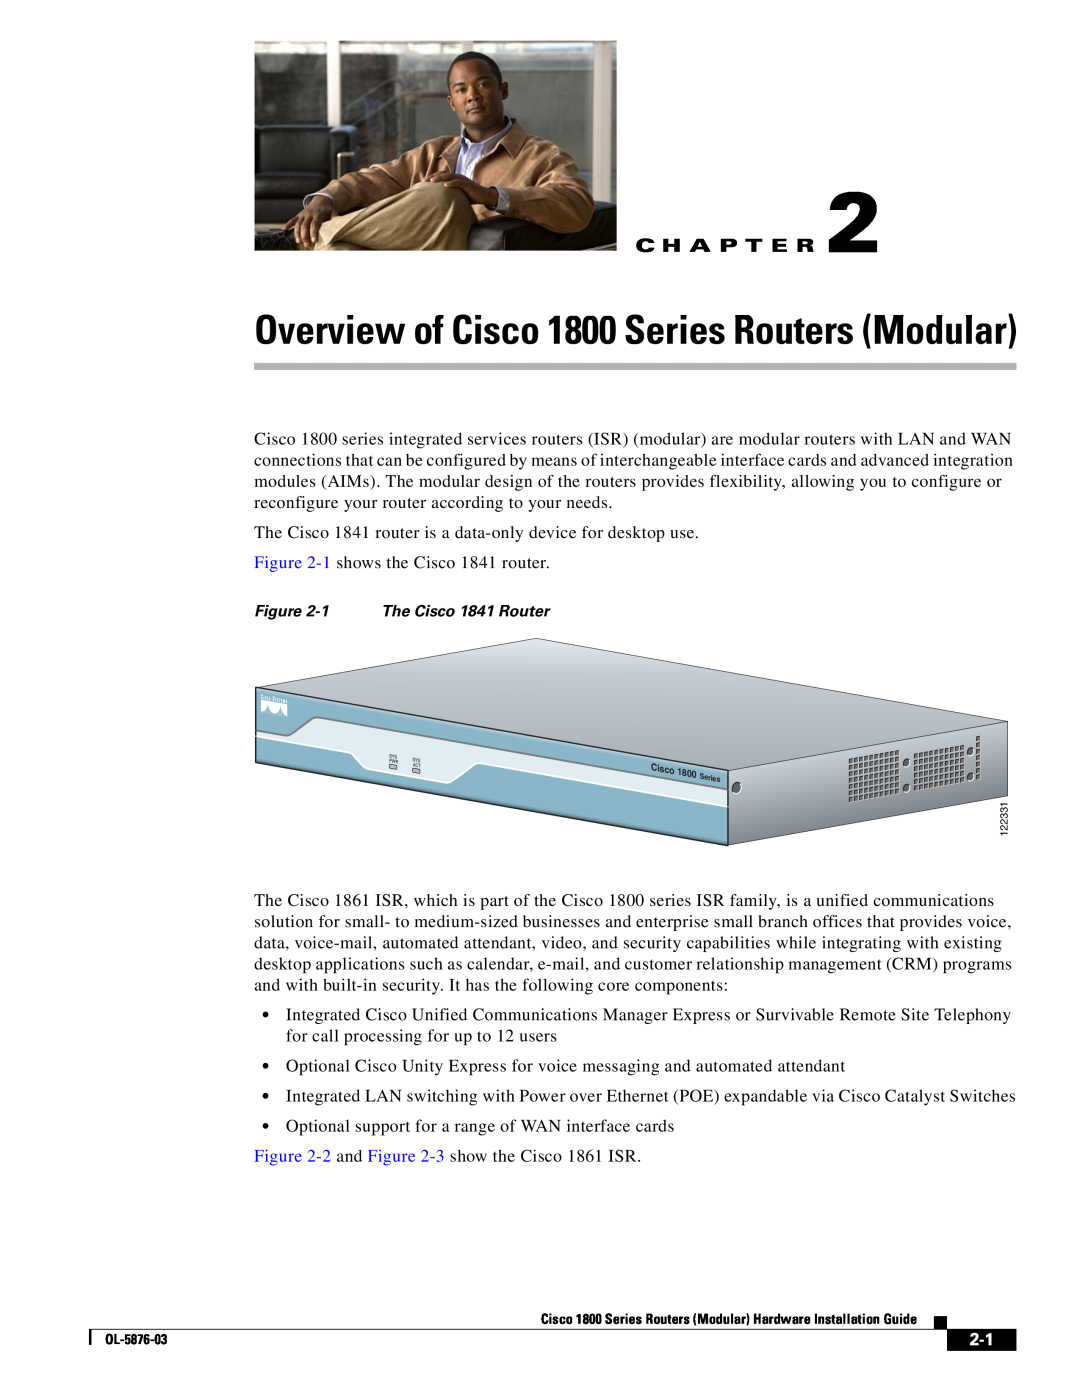 Cisco Systems CISCO1841-HSEC/K9-RF manual Overview of Cisco 1800 Series Routers Modular, C H A P T E R 